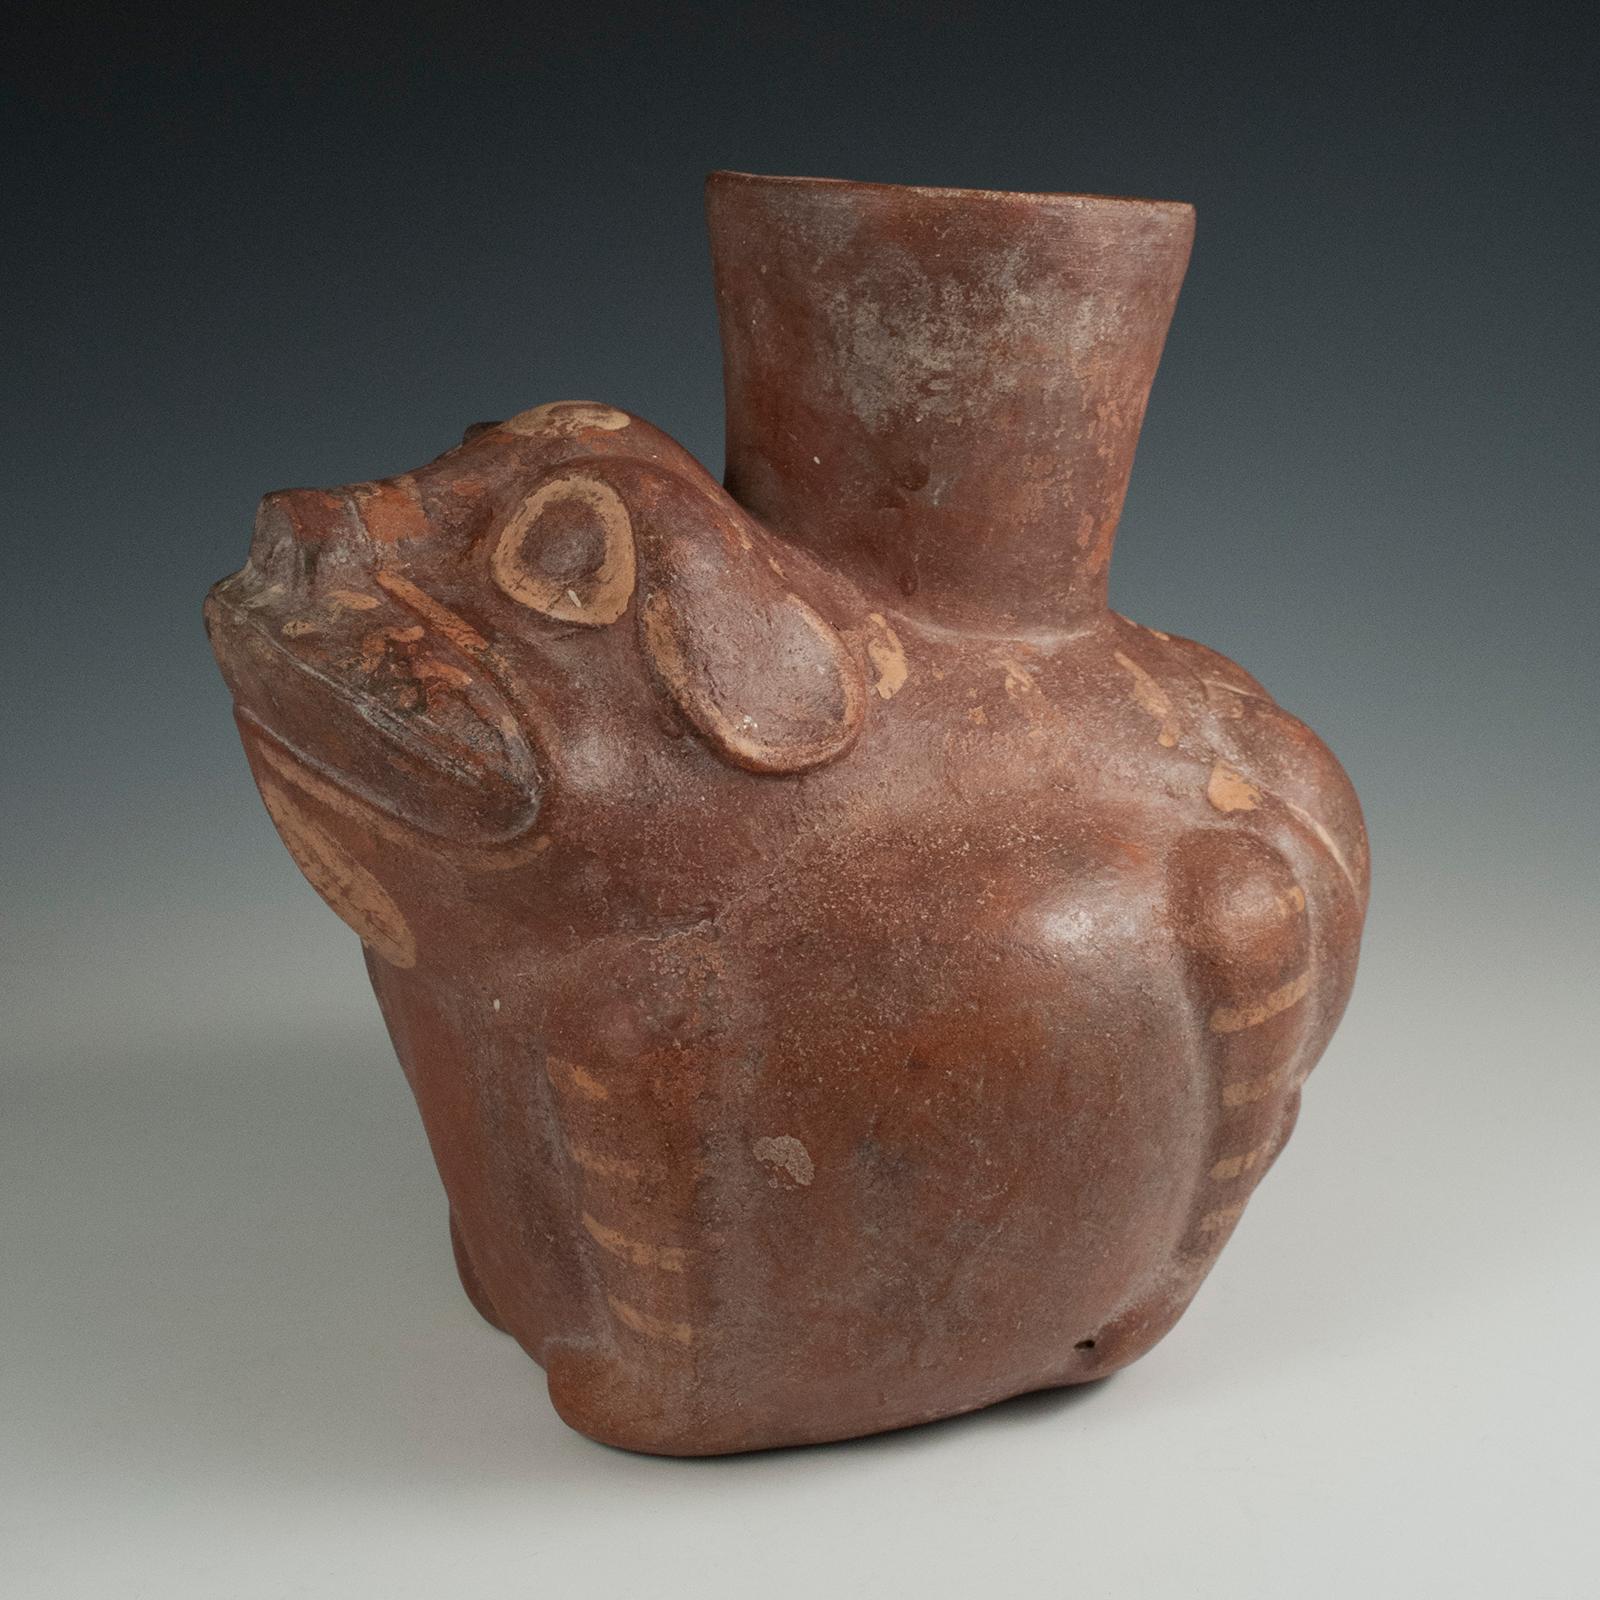 Pre-Columbian terracotta dog/frog vessel Huari/Moche culture, North Coast Peru

A shape-shifting crouching dog/frog in reddish brown and cream painted earthenware with a flared mouth rising from the center of the back. Unusual is the rear view,